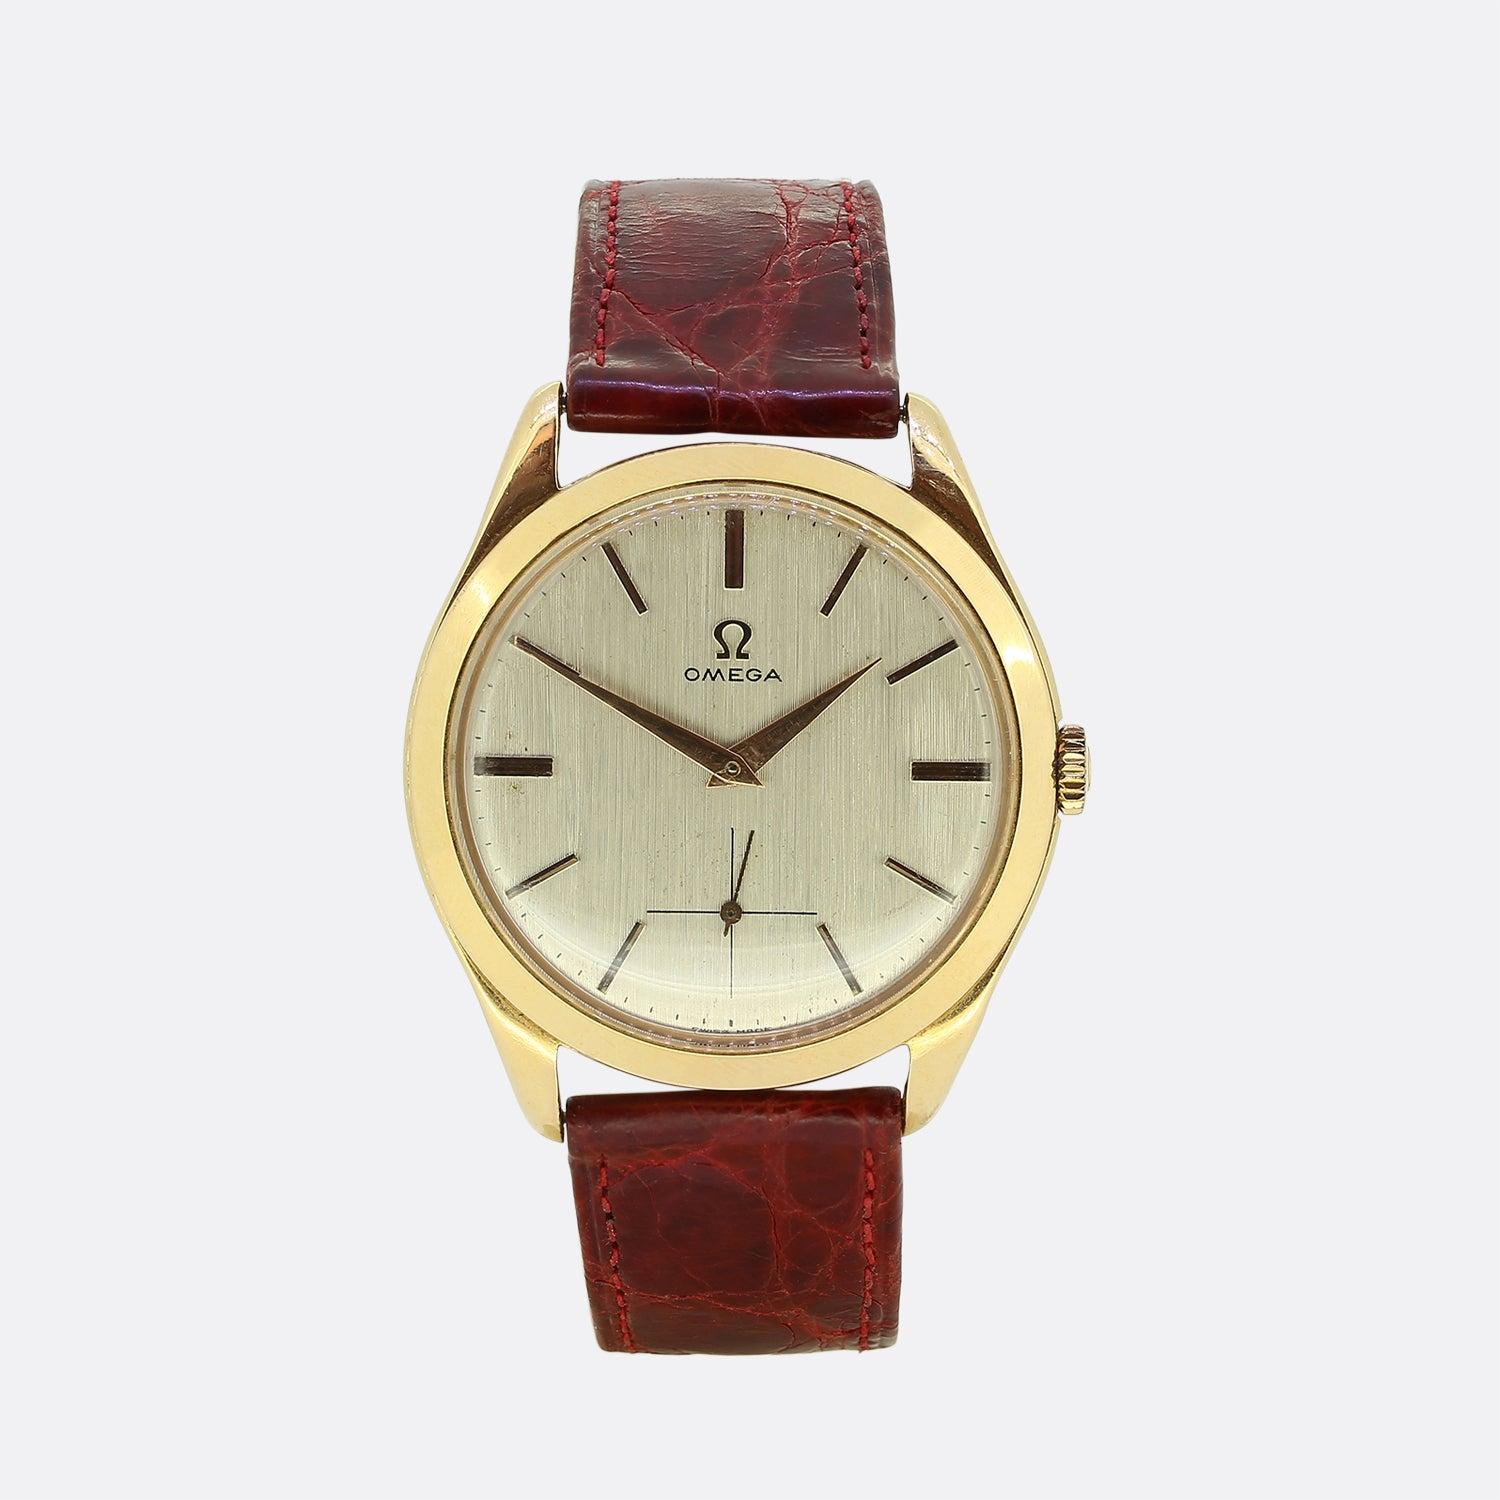 Here we have a beautifully crafted watch from the world renowned watchmakers, Omega. A classic vintage design offers an off-white dial playing host to gold hour batons, Omega signature and sub-dial; all of which is contained within an 18ct yellow